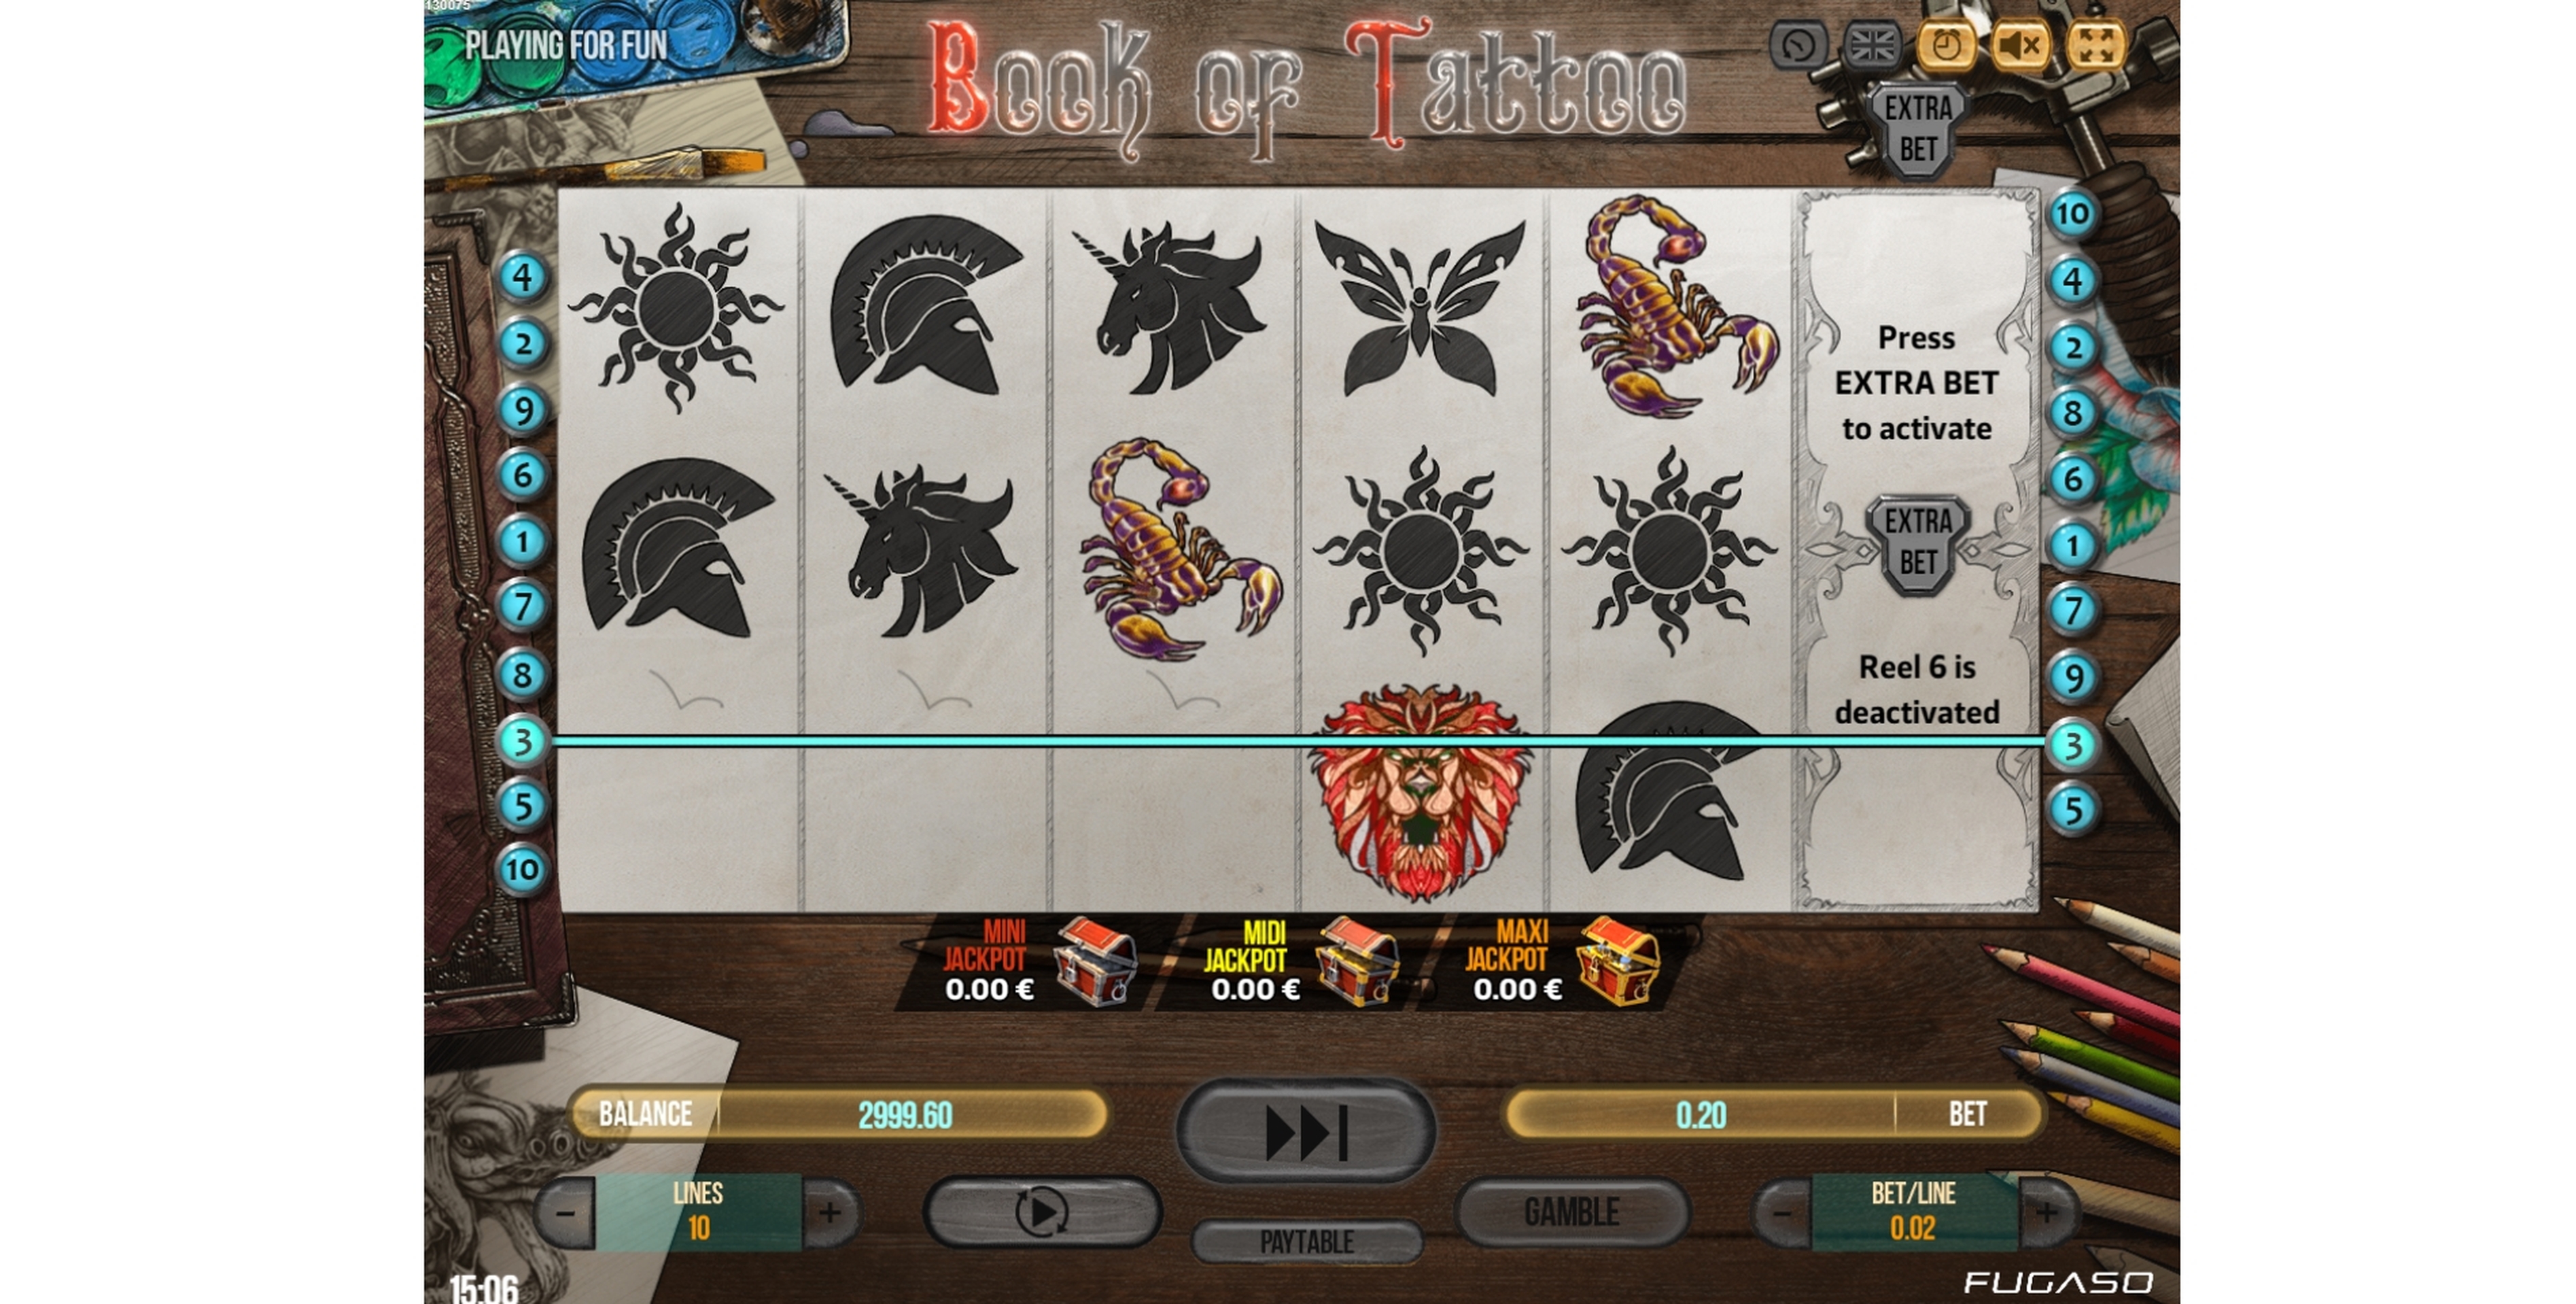 Win Money in Book Of Tattoo Free Slot Game by Fugaso